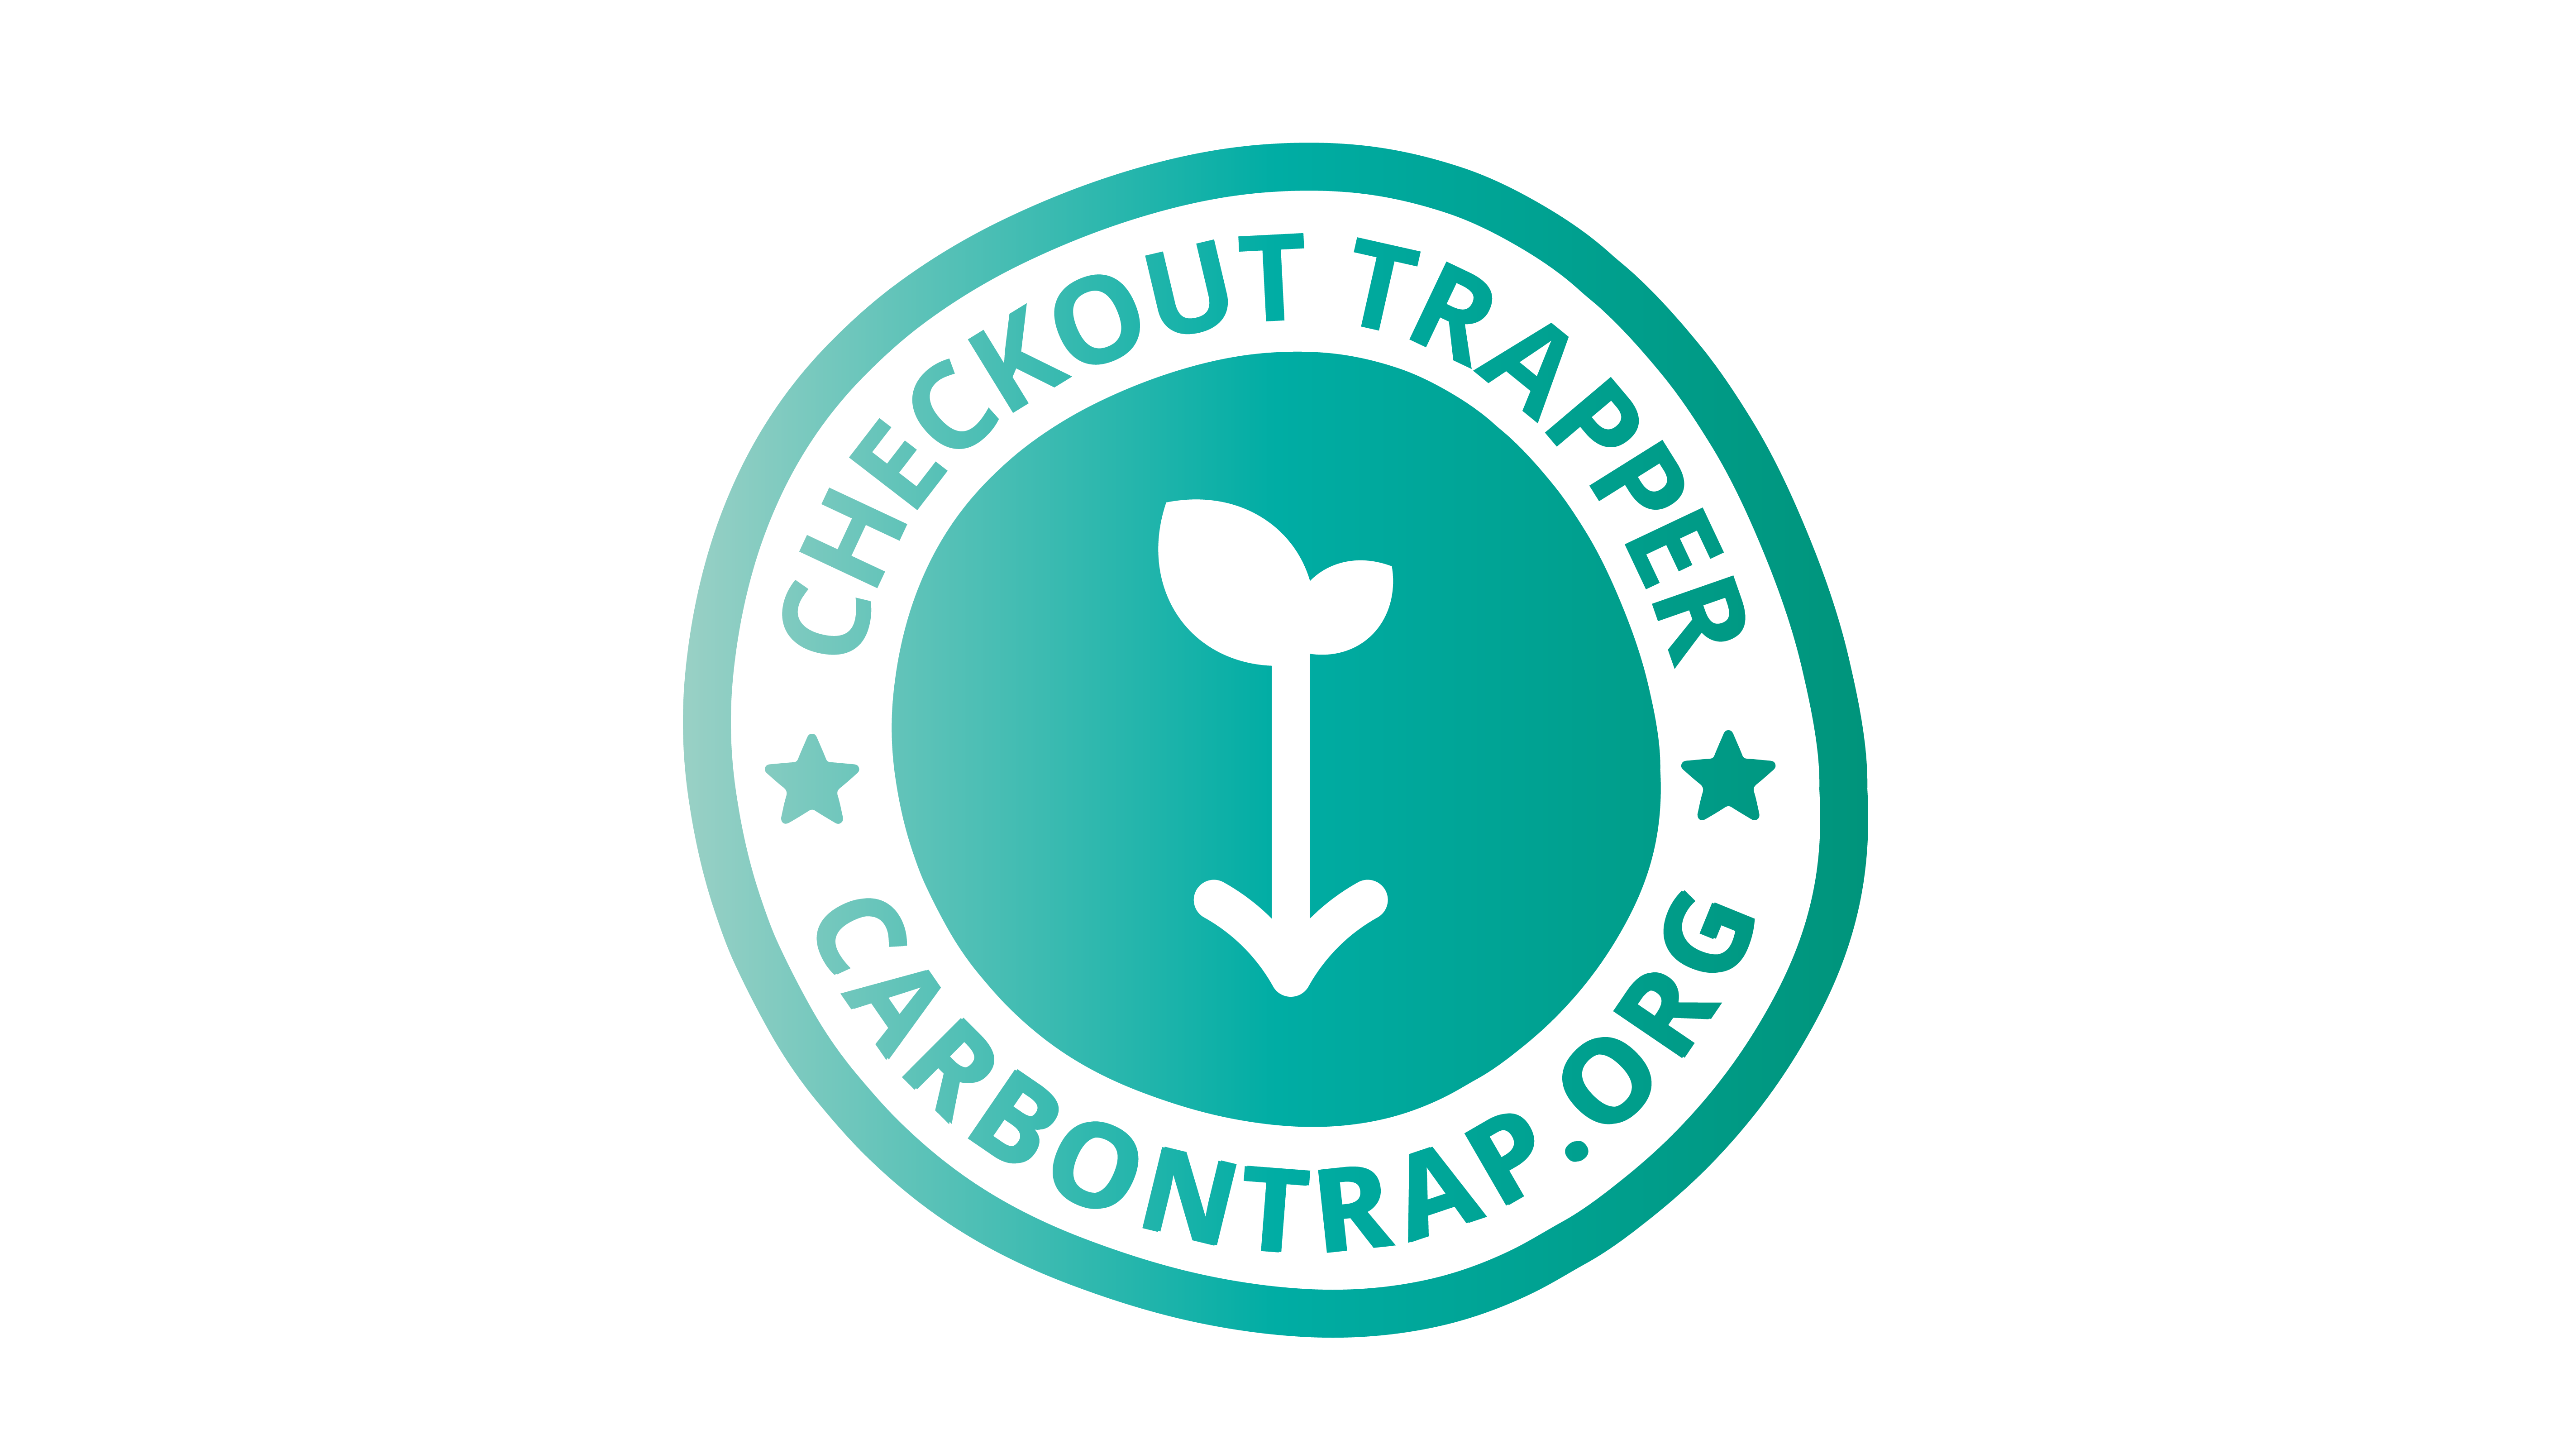 The Checkout Trapper logo from Carbon Trap